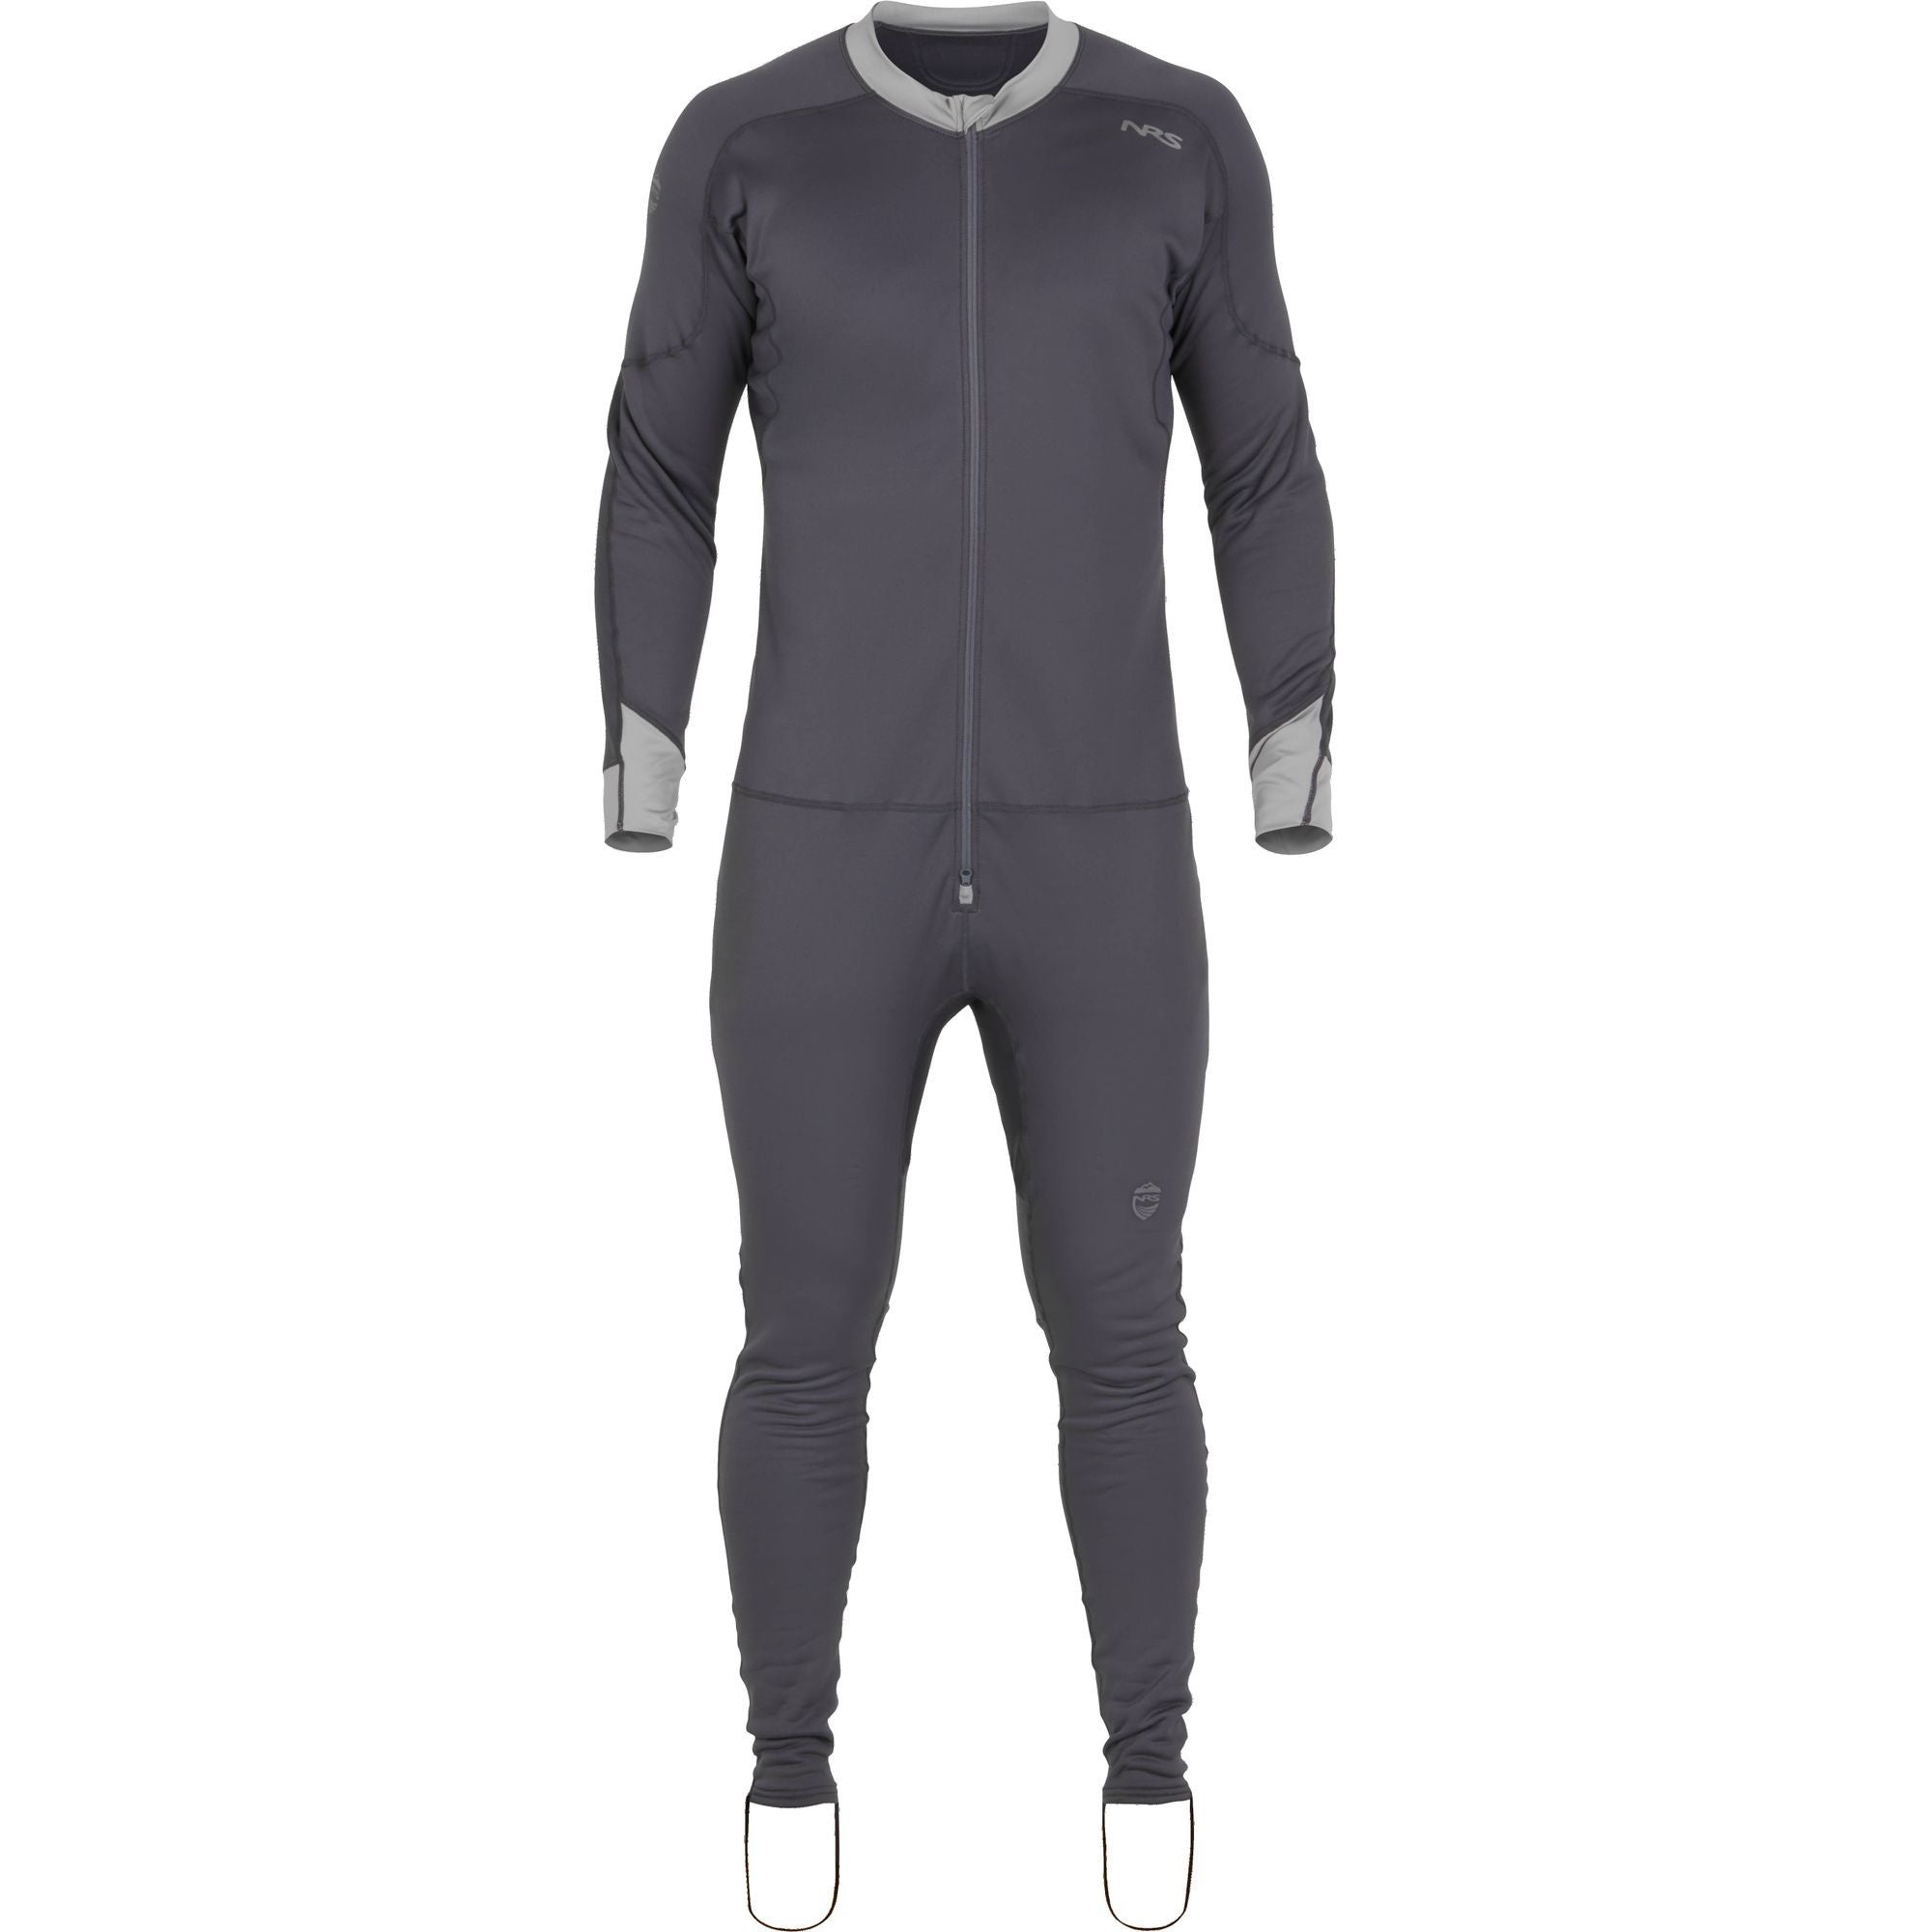 NRS Expedition Weight Union Suit, Men's